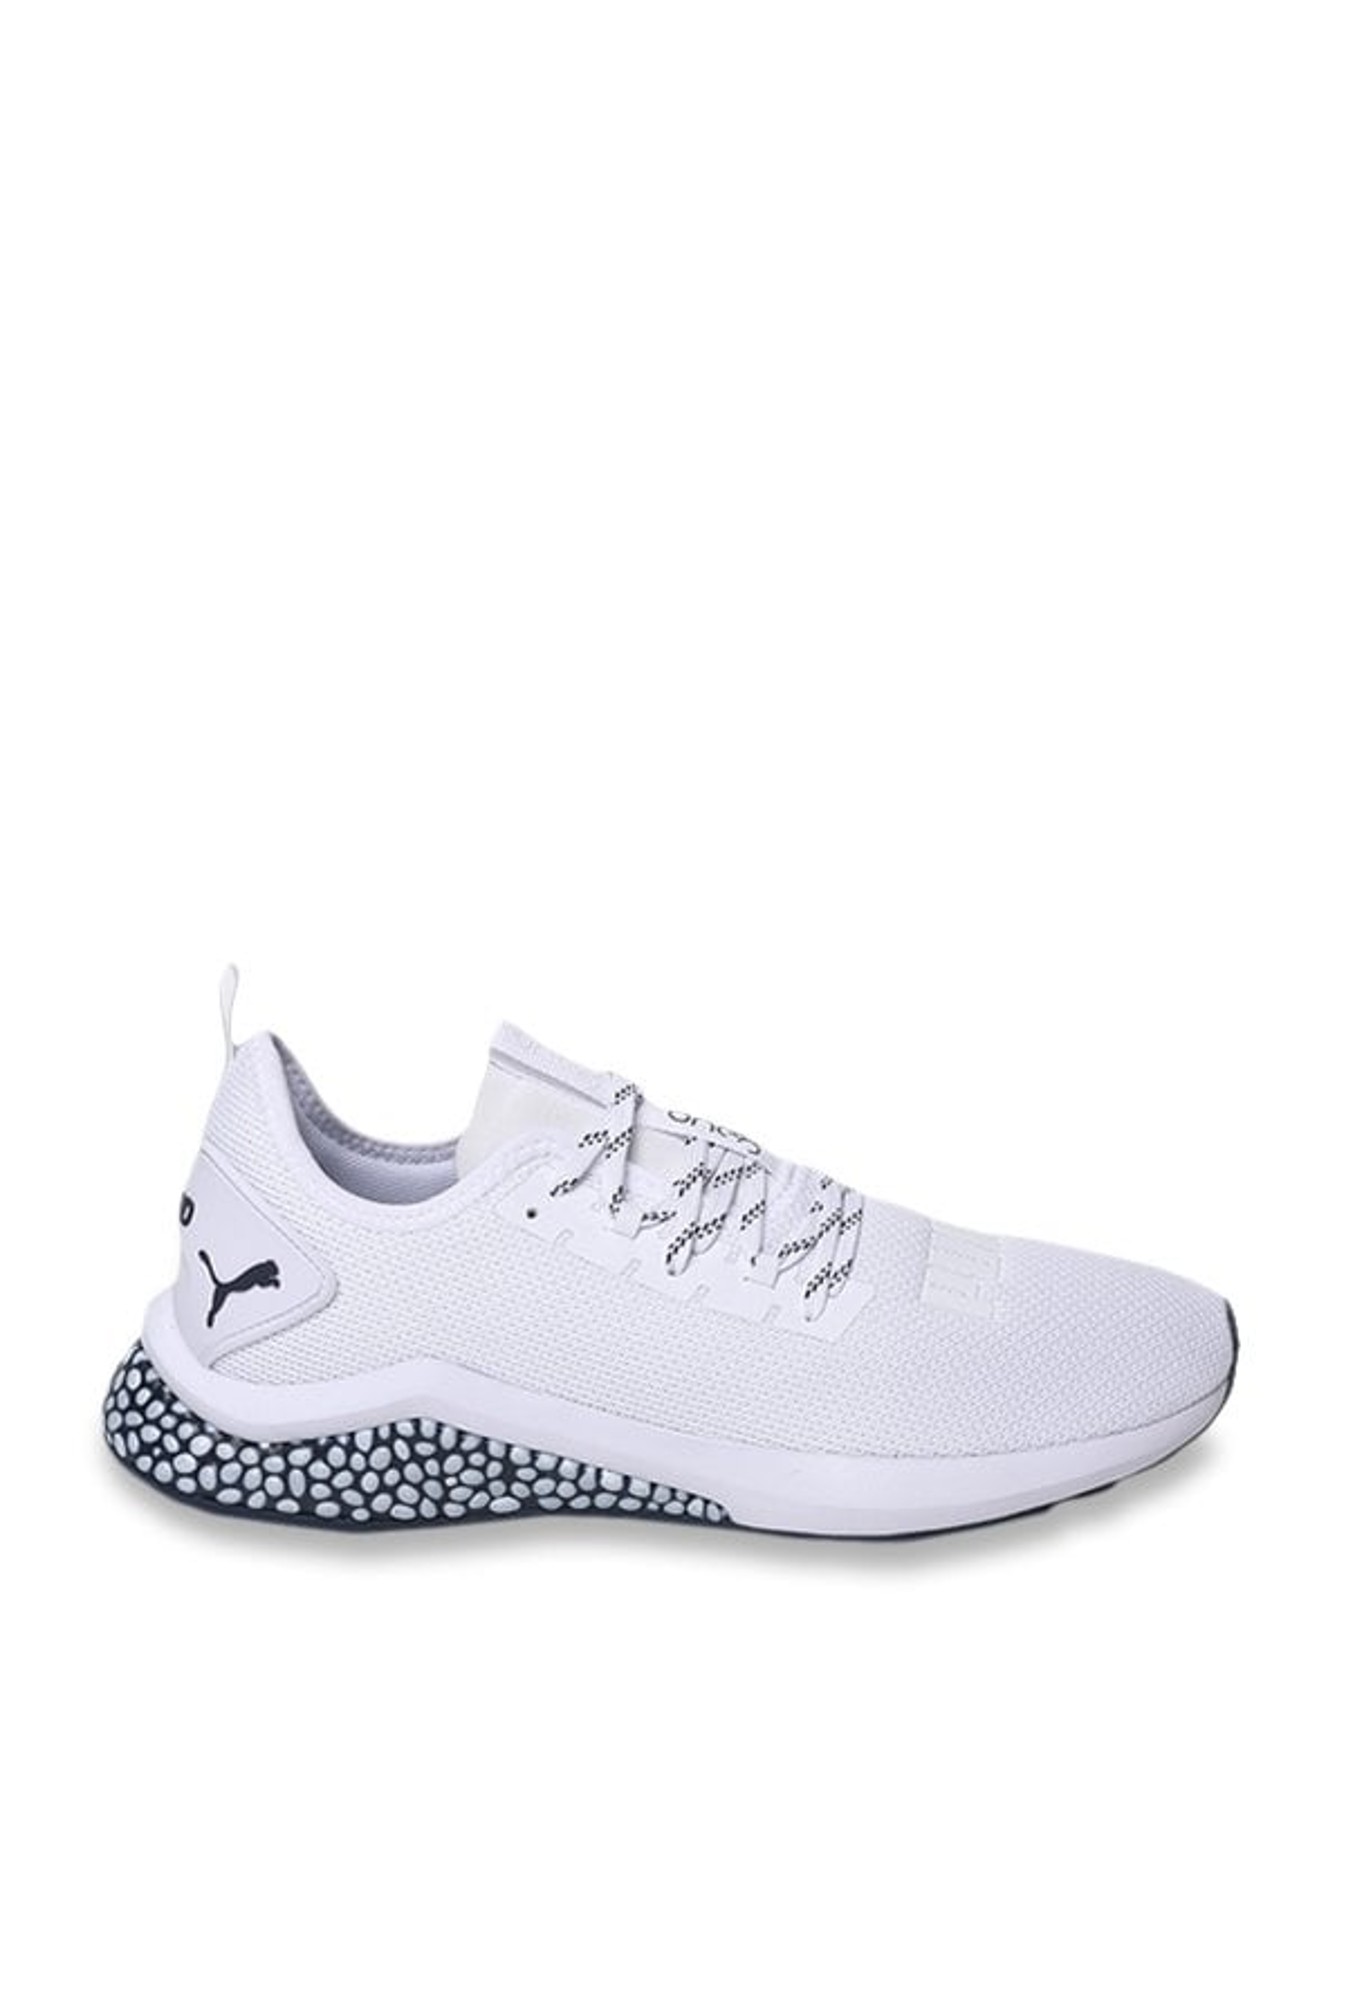 puma nx one 8, OFF 73%,Latest trends,